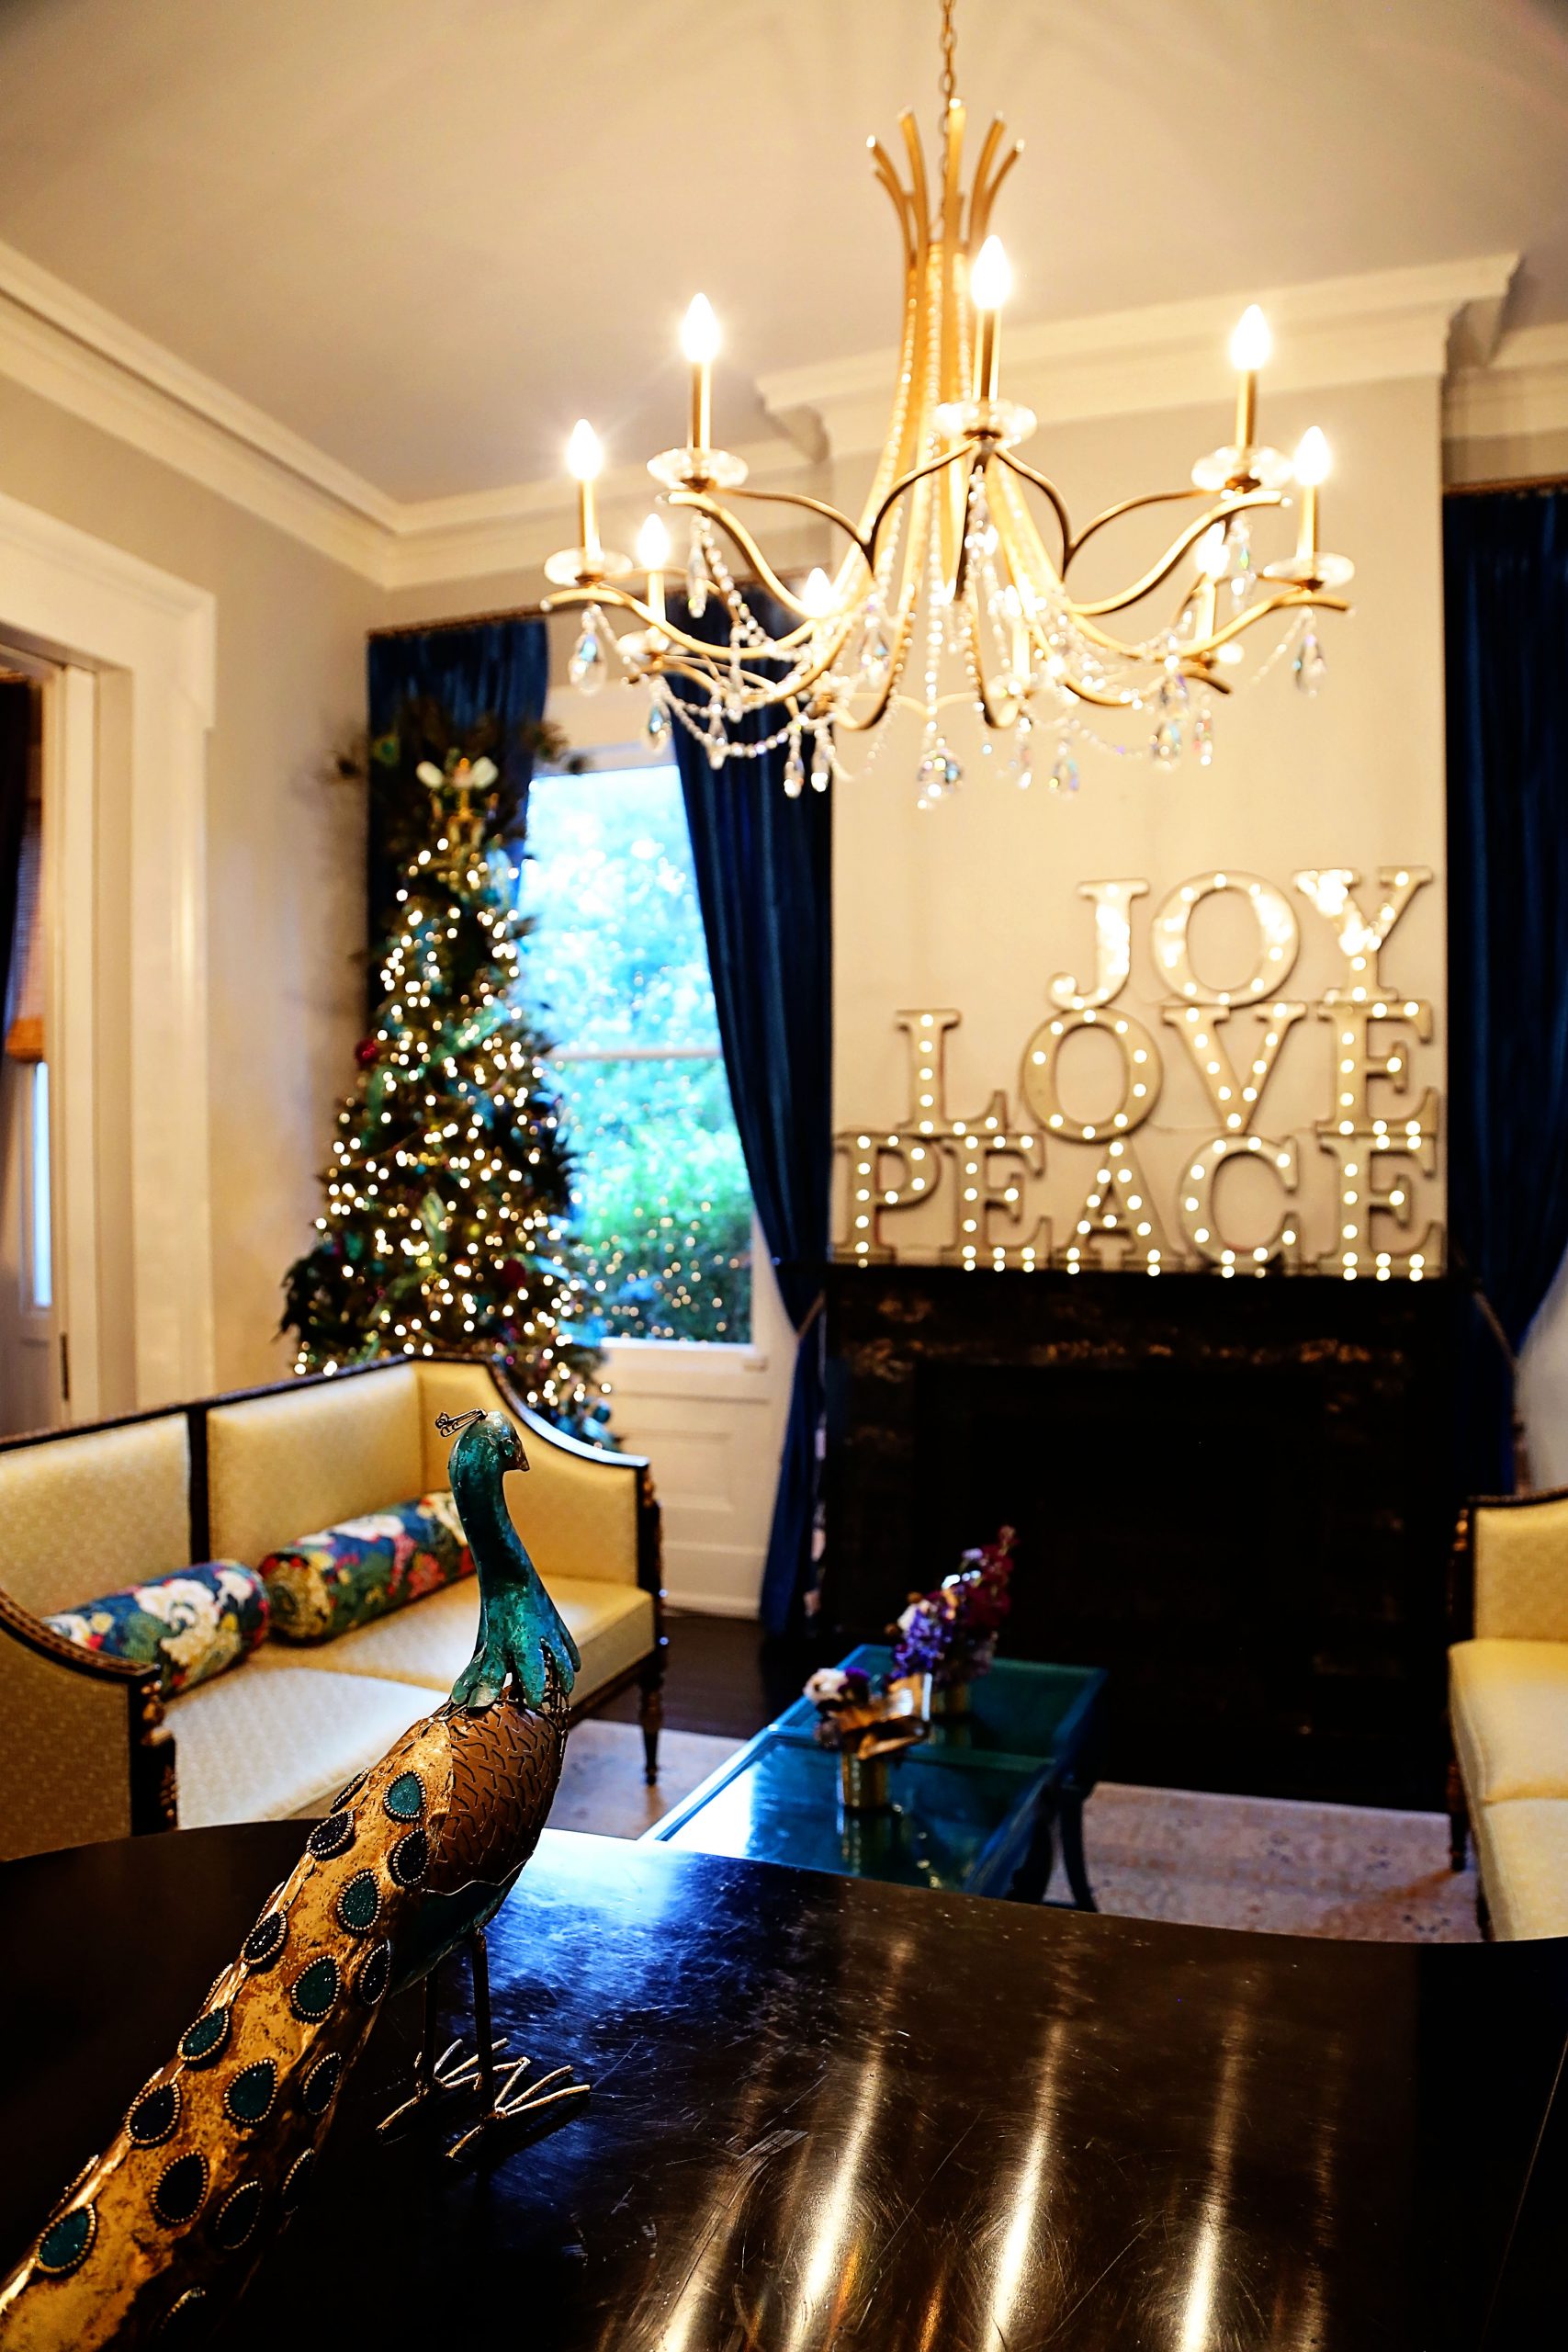 new orleans, staging, stager, bespoke staging and design, bespoke nola staging and design, home stager, home staging, real estate staging, real estate stager, property staging, staging for christmas, decorate for christmas, christmas decor, christmas staging, holiday staging, holiday decorating, holiday interiors, christmas decoration